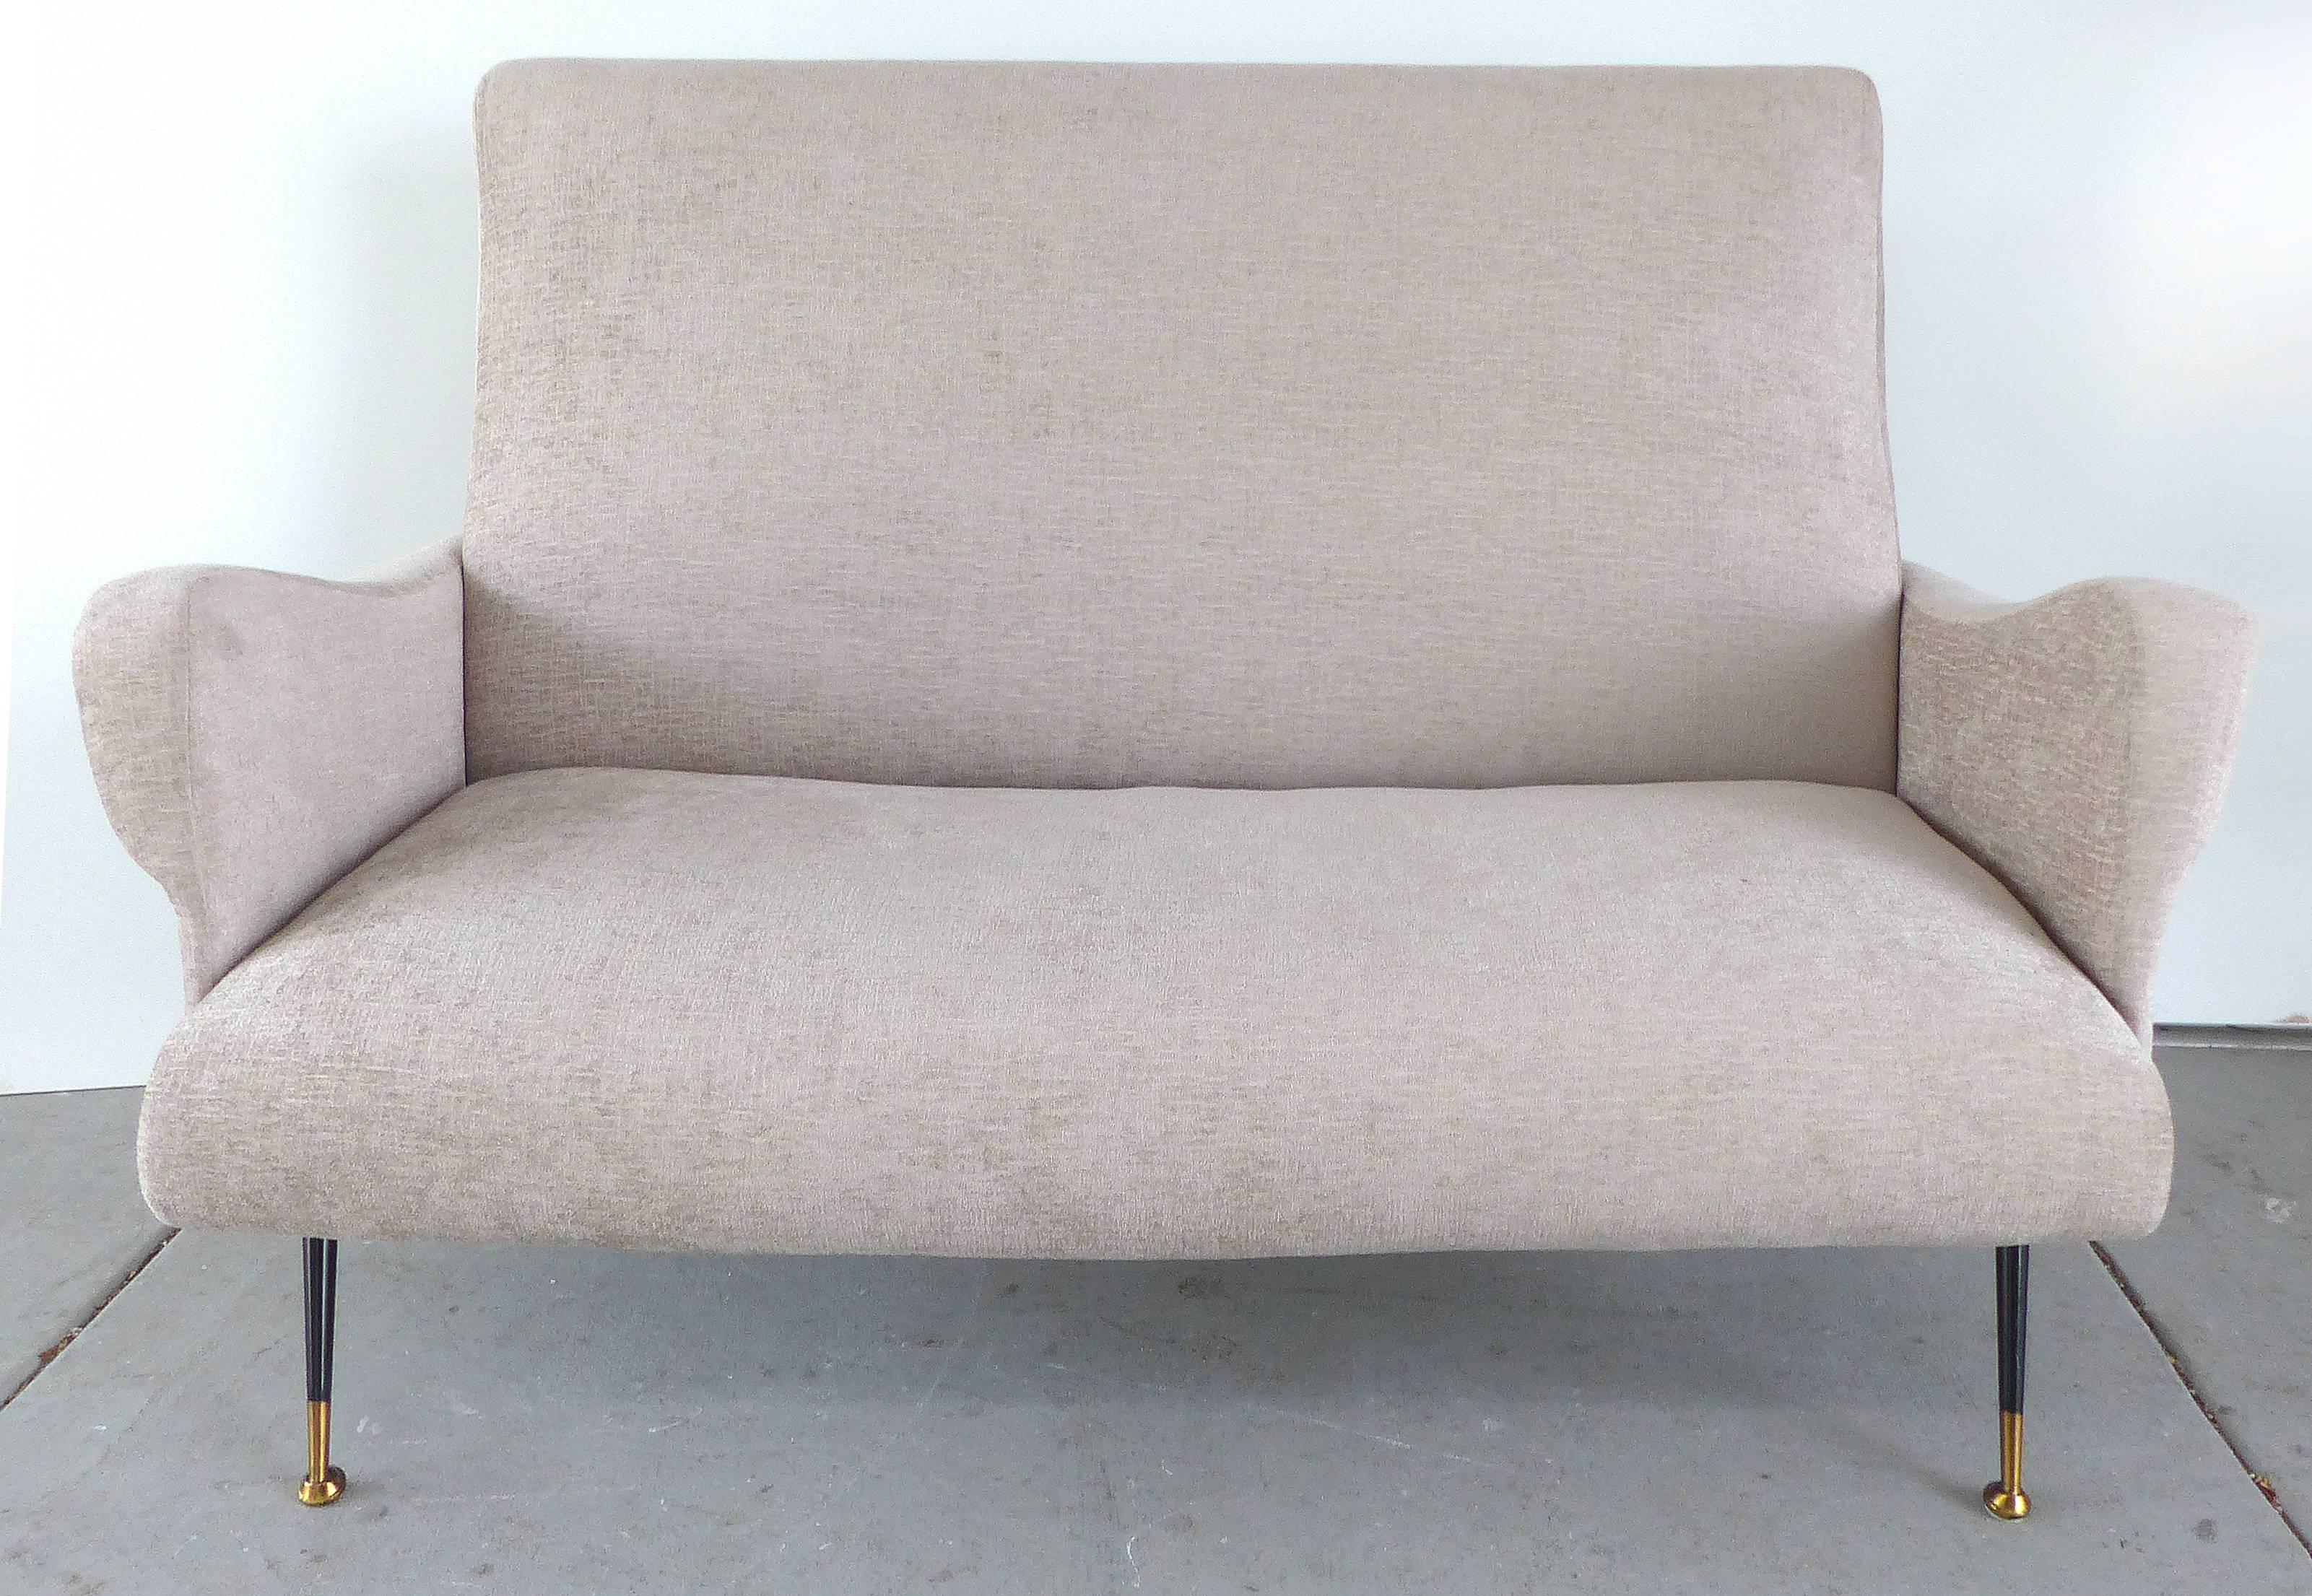 A Italian modern settee newly upholstered in a lightly textured chenille velvet, circa 1950s. This Classic settee is supported by splayed tapered metal legs fitted with brass feet. The arms sinuously curve and roll with lovely details.